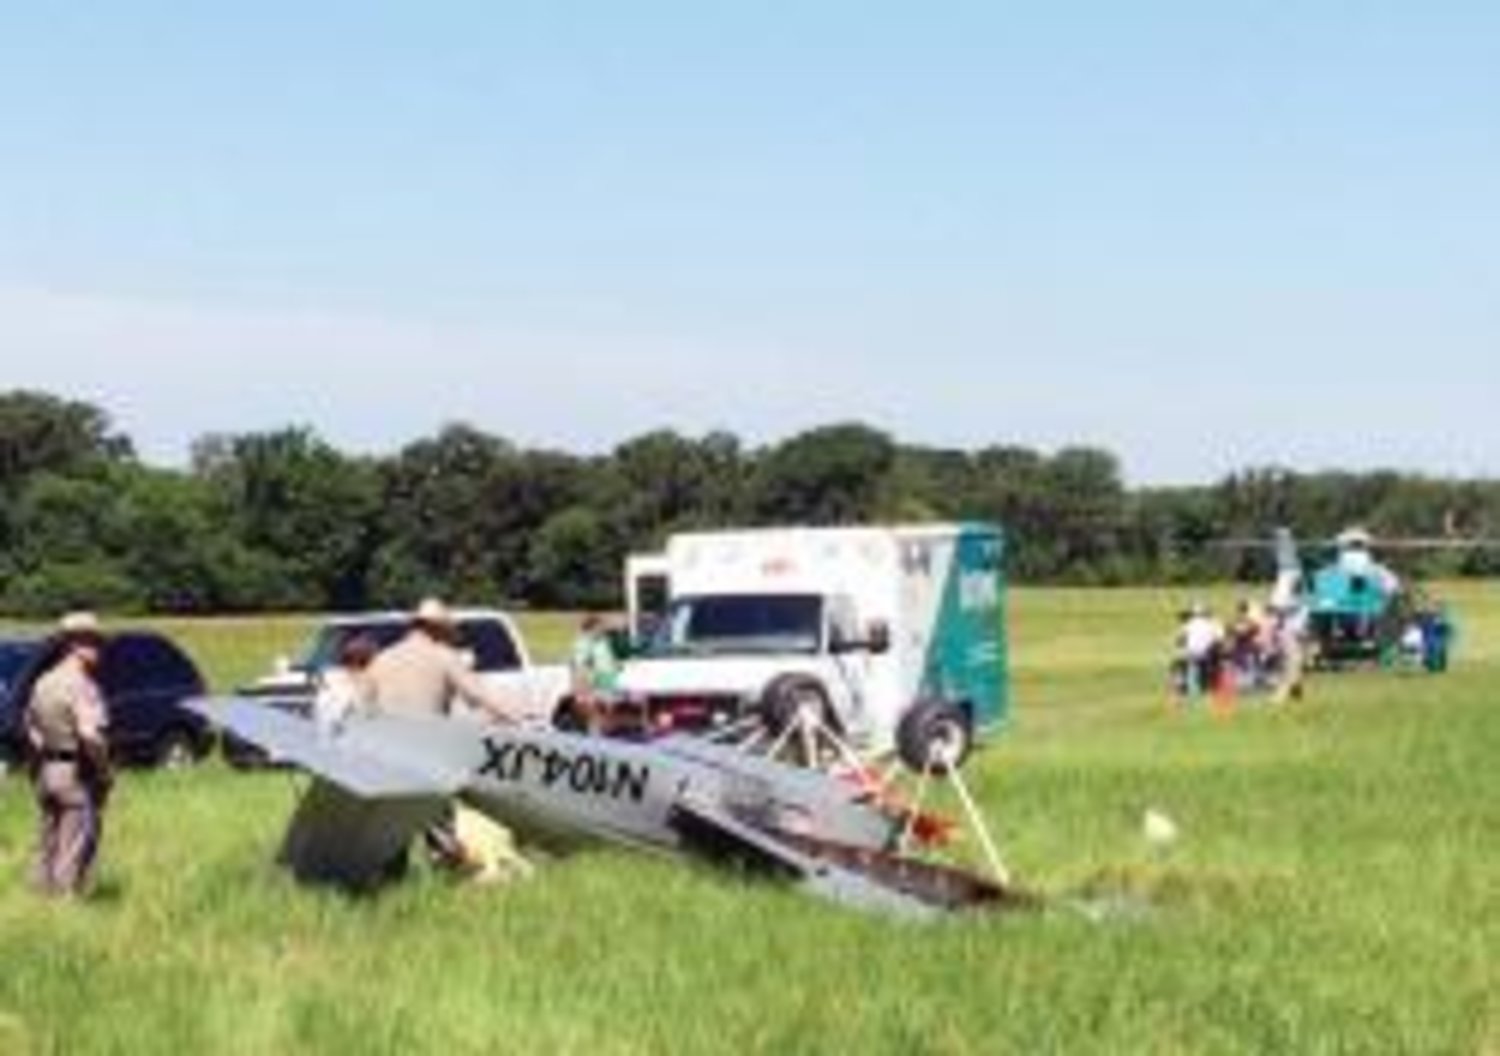 A small plane piloted by Benjamin Kunziker crashed just off Wood County Road 3220 near FM 778 last week.